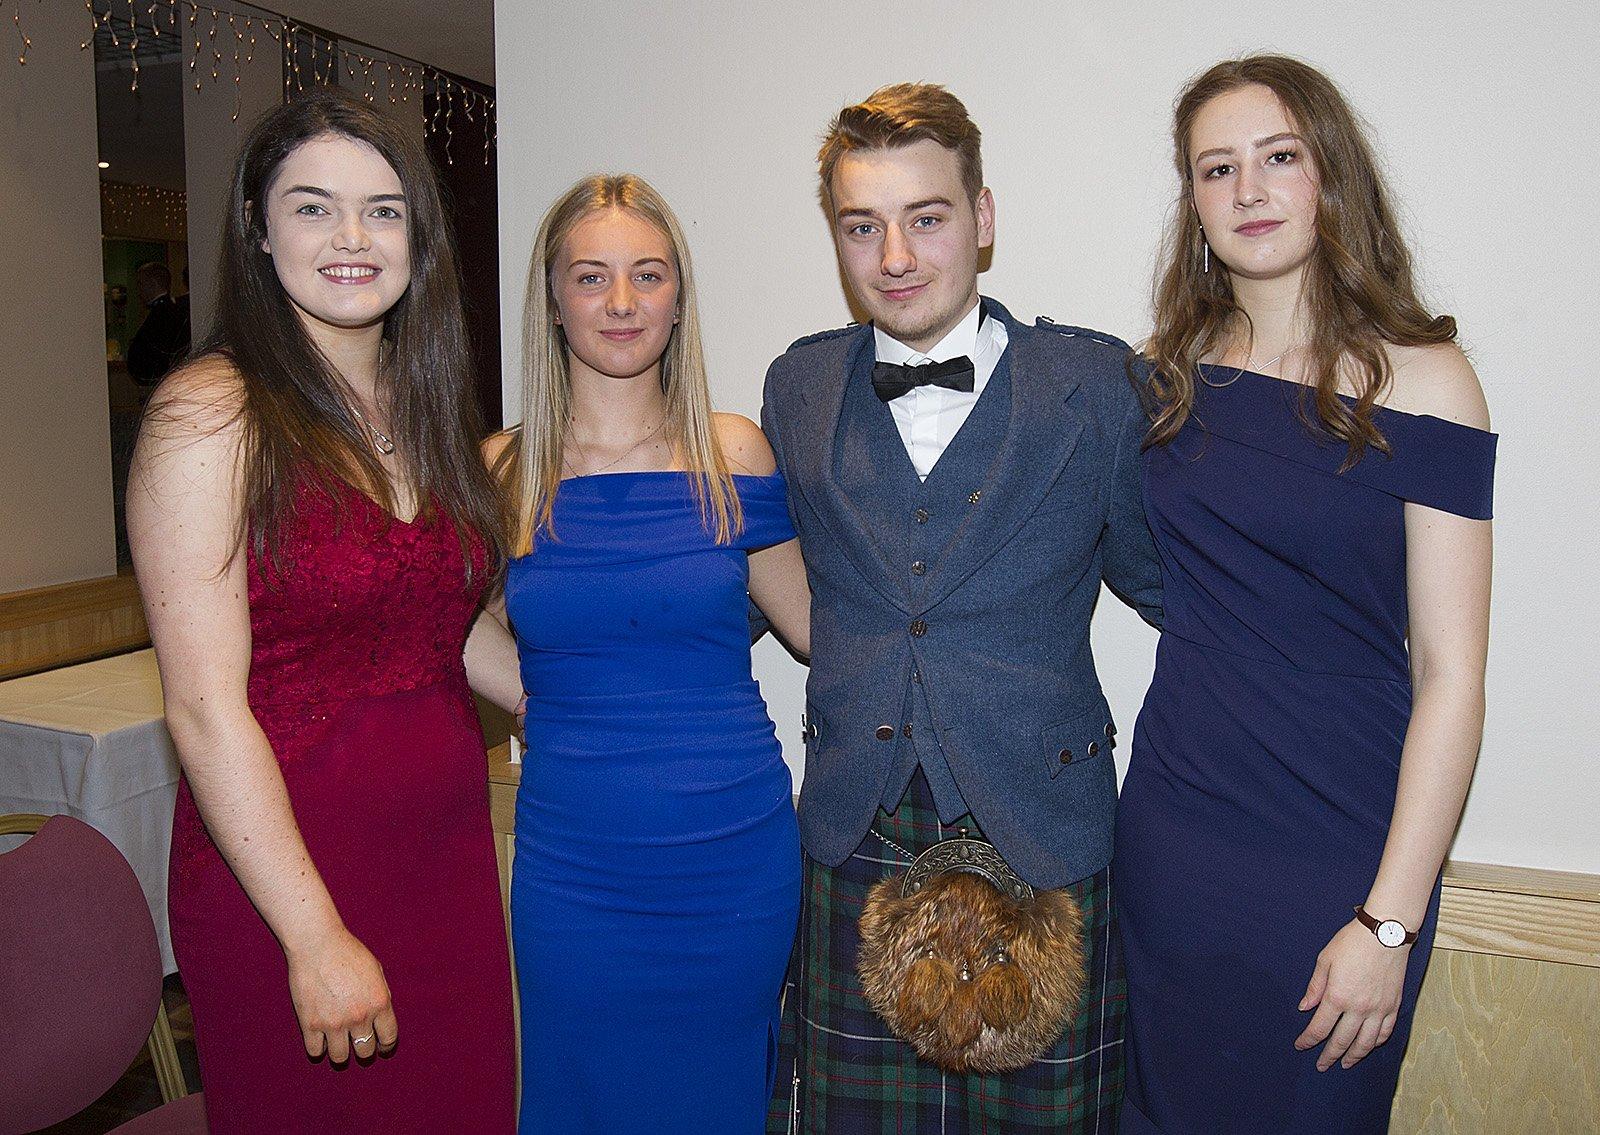 Kirsty Barr, Hannah Maxwell, Mitchell Reid and Isla Barrauit at a young farmers' ball held in Kelso on Friday.